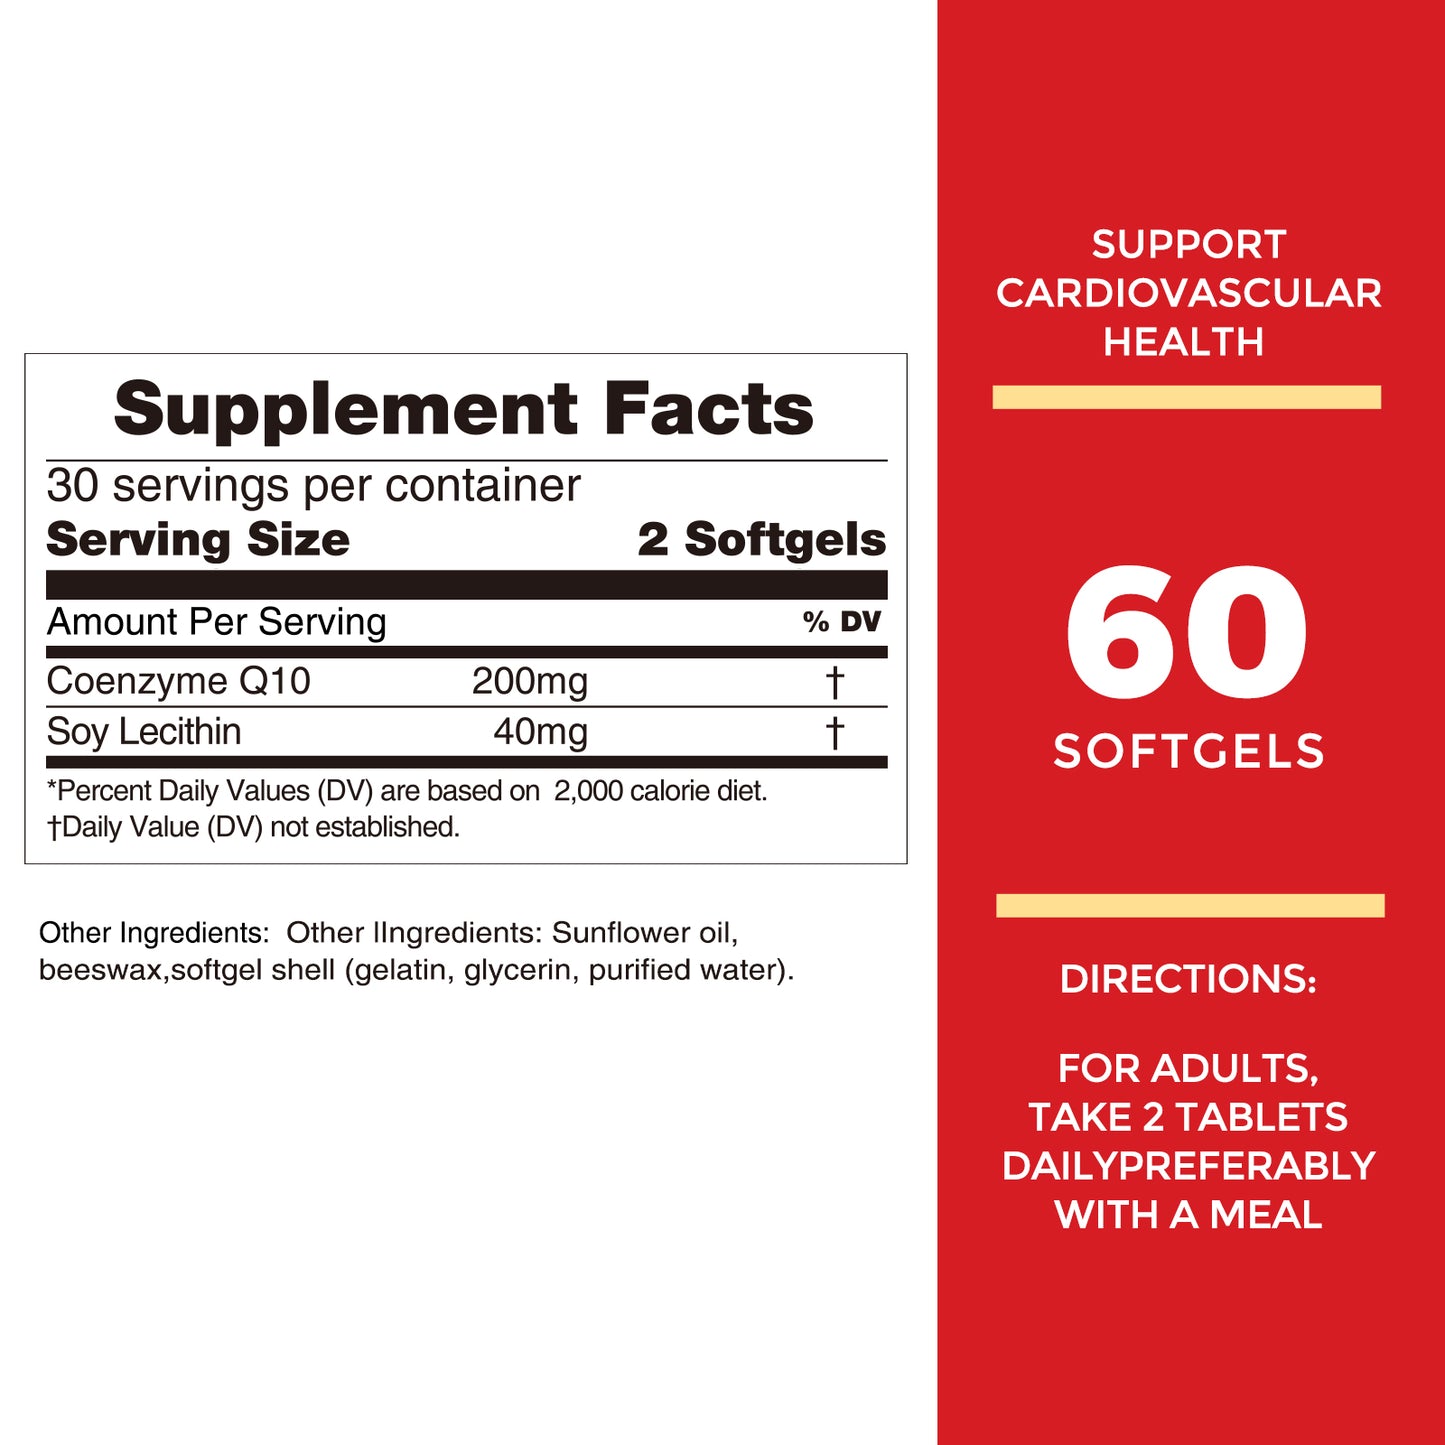 Nature's Key CoQ10 200mg Softgels - Coenzyme Q10 Supplements with 50mg Soy Lecithin -Water Soluble- for Vascular and Heart Health, Energy Production & Antioxidant Support - 1 Month Supply - 60 Cts…